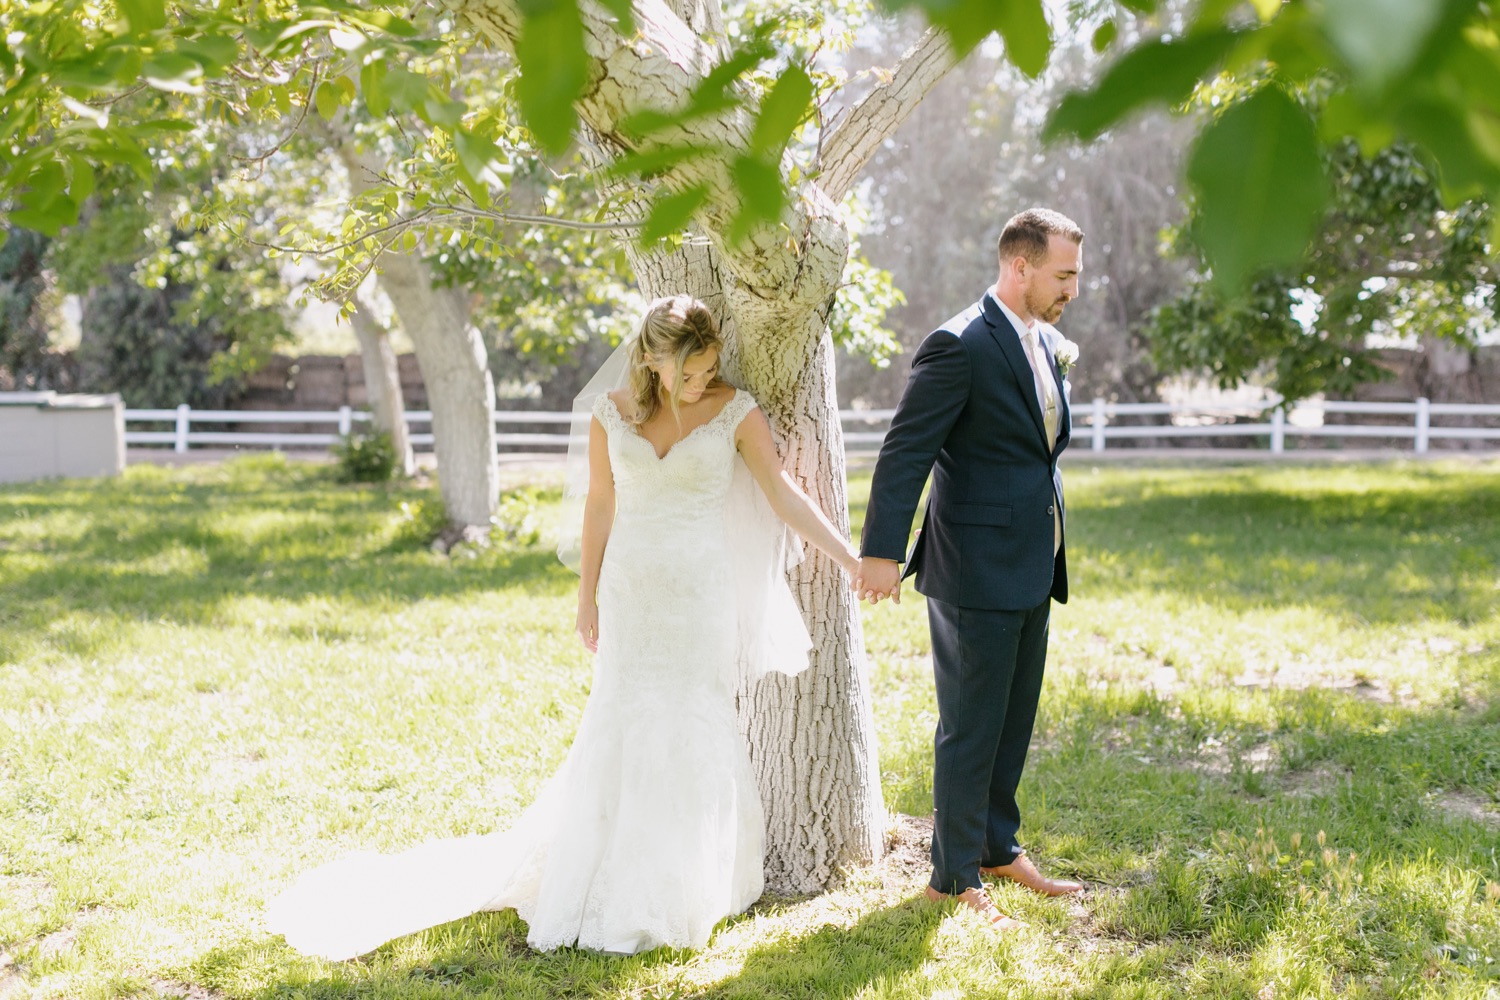 Bride and groom pray together for first touch before wedding ceremony at walnut grove